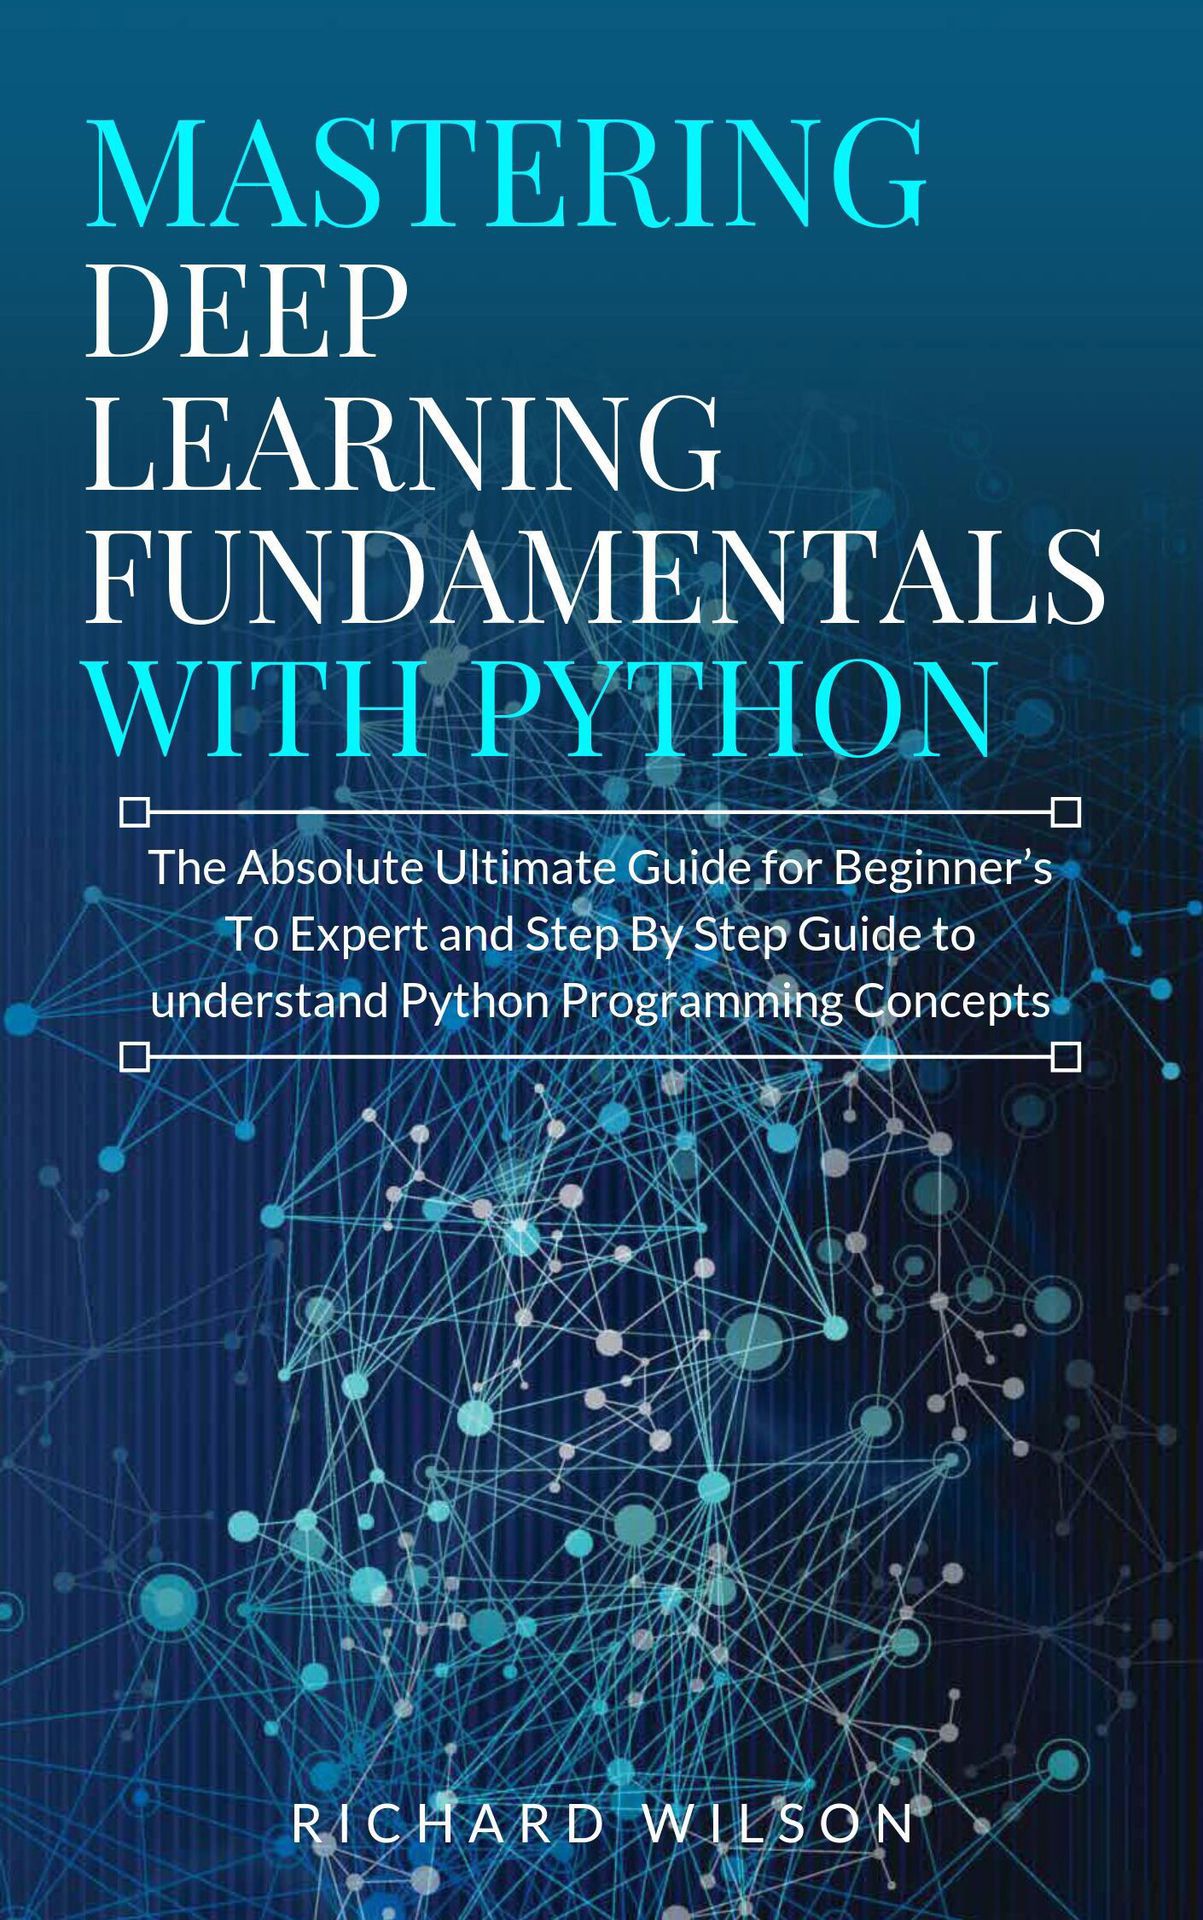 MASTERING DEEP LEARNING FUNDAMENTALS WITH PYTHON The Absolute Ultimate Guide - photo 1